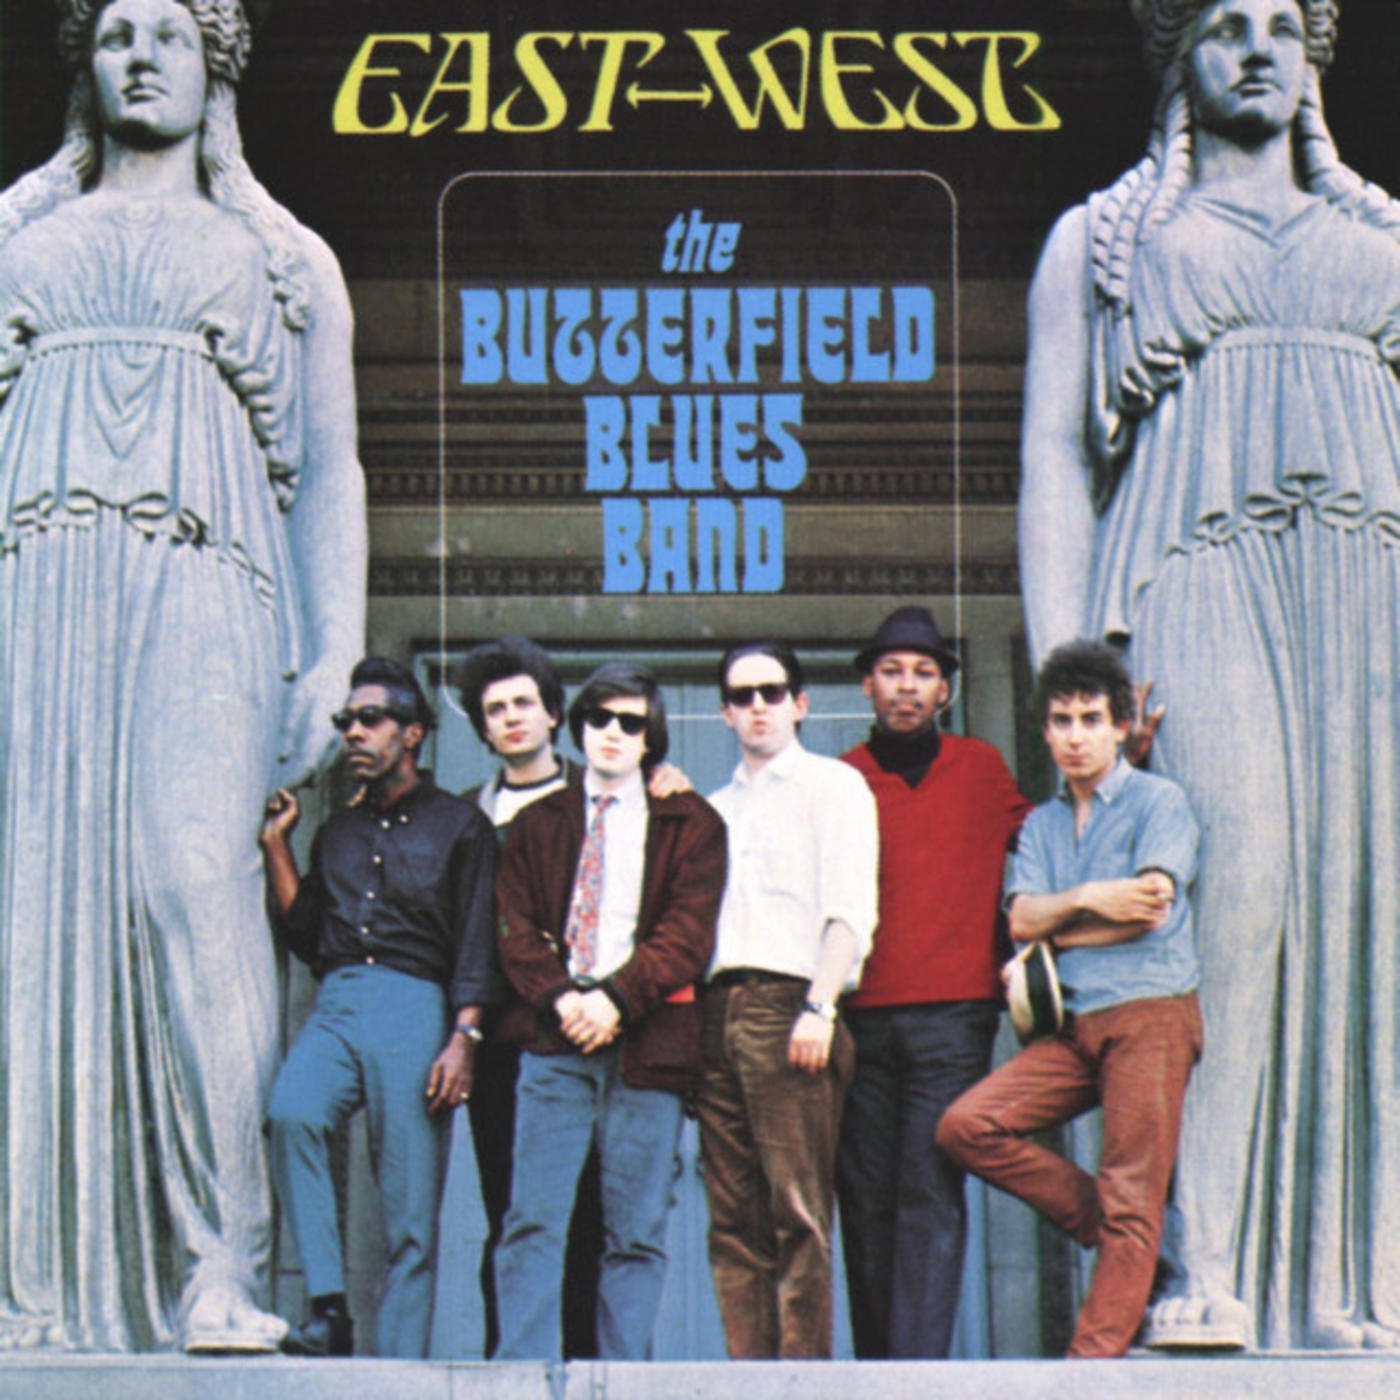 Mary, Mary - The Paul Butterfield Blues Band, The Monkees, RUN-DMC